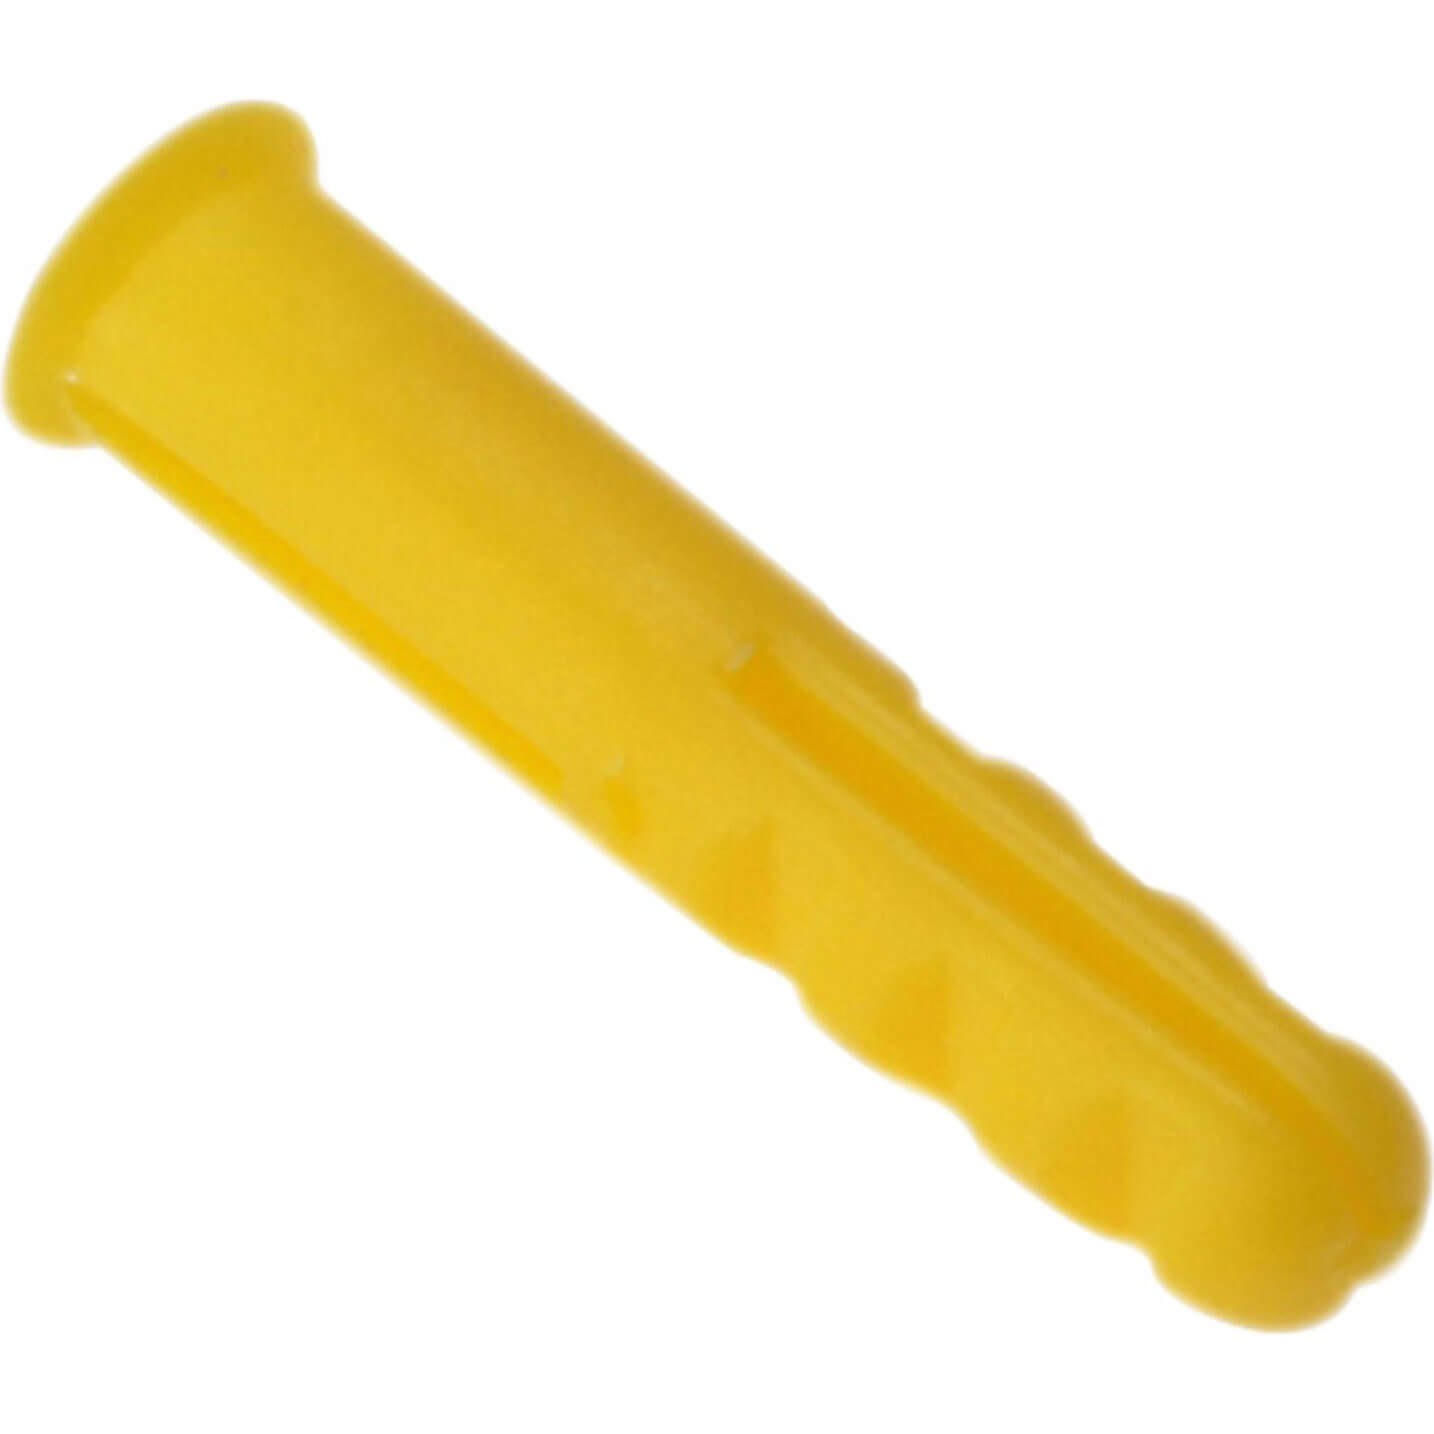 Photo of Forgefix Plastic Expansion Wall Plugs Yellow Pack Of 60